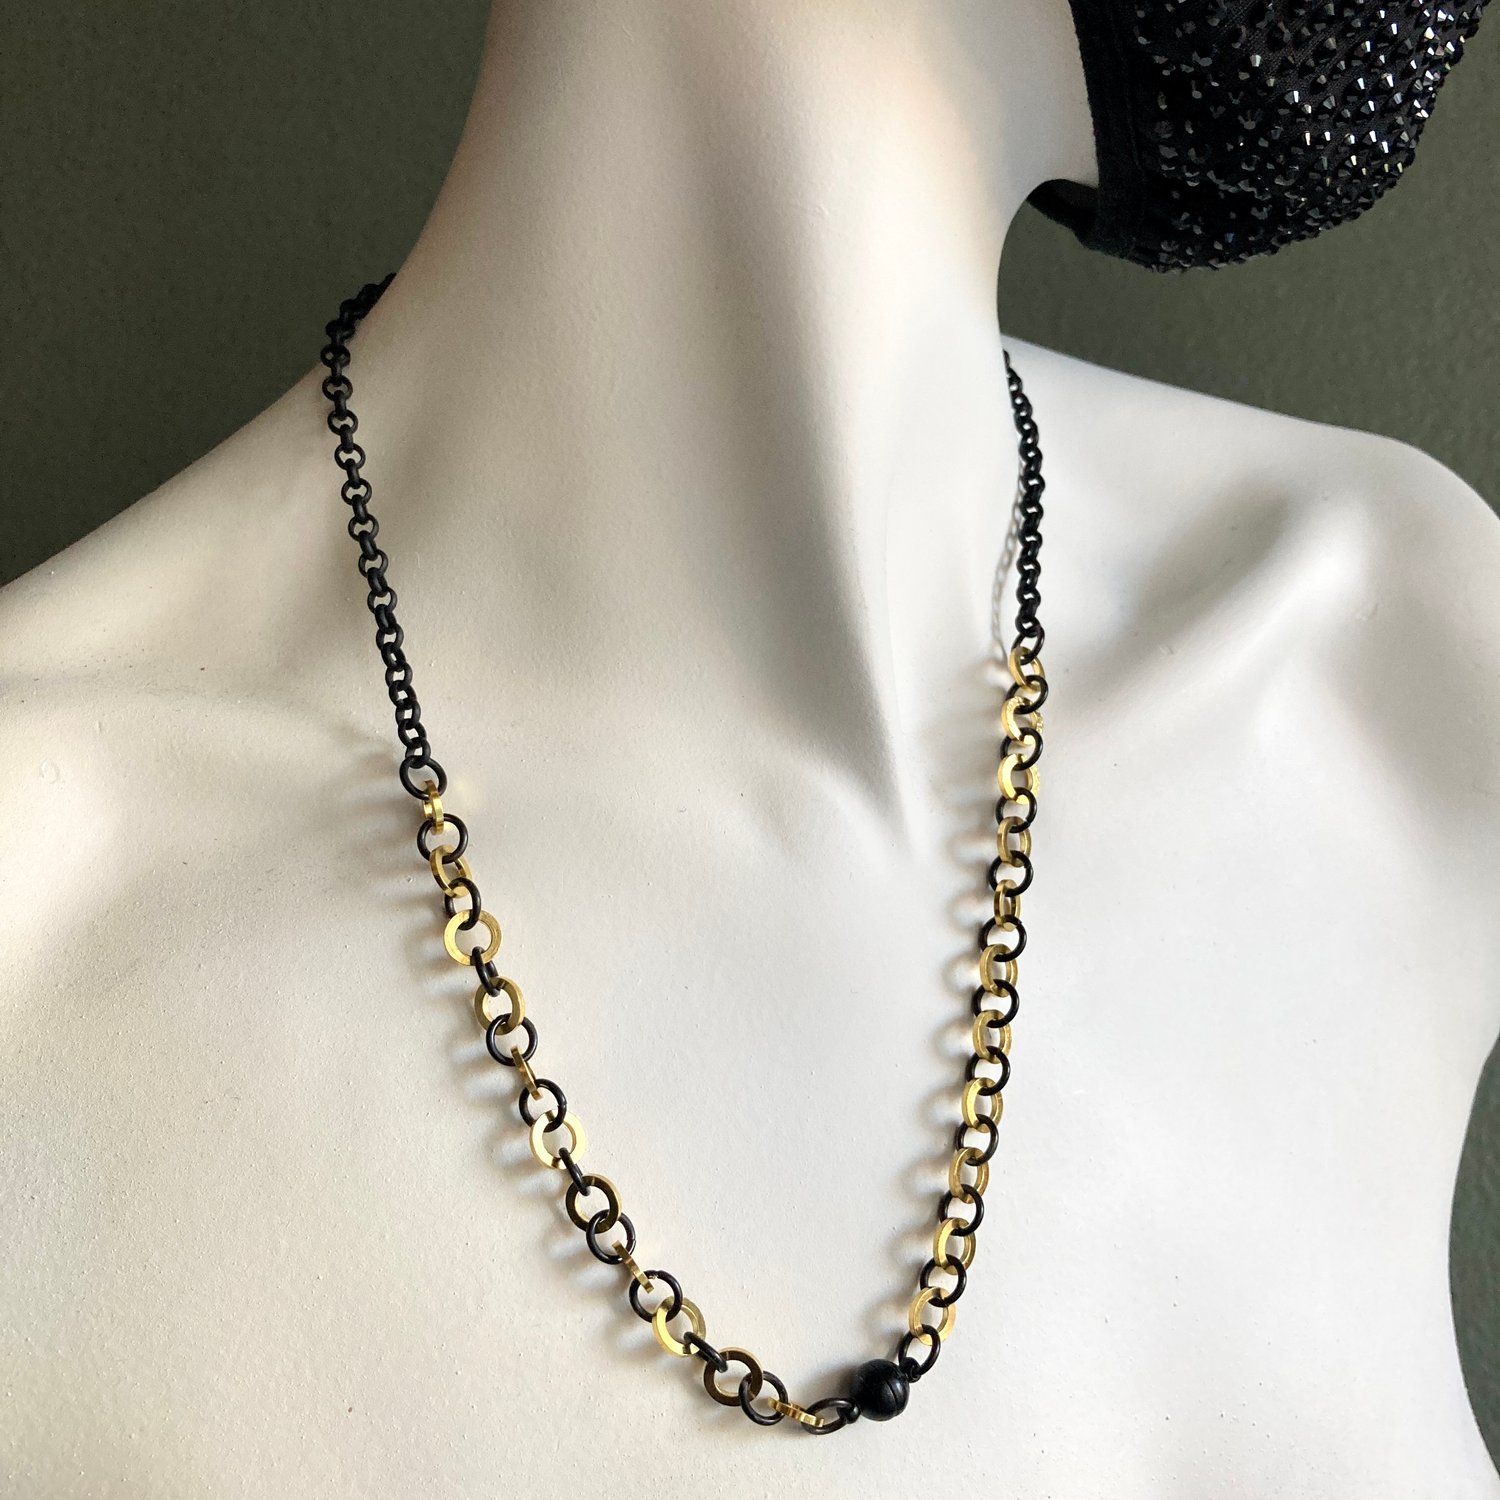 Image of  21.5" Matte Black & Gold Convertible Necklace/Mask Chain with Matte Black Ball Magnet Clasp